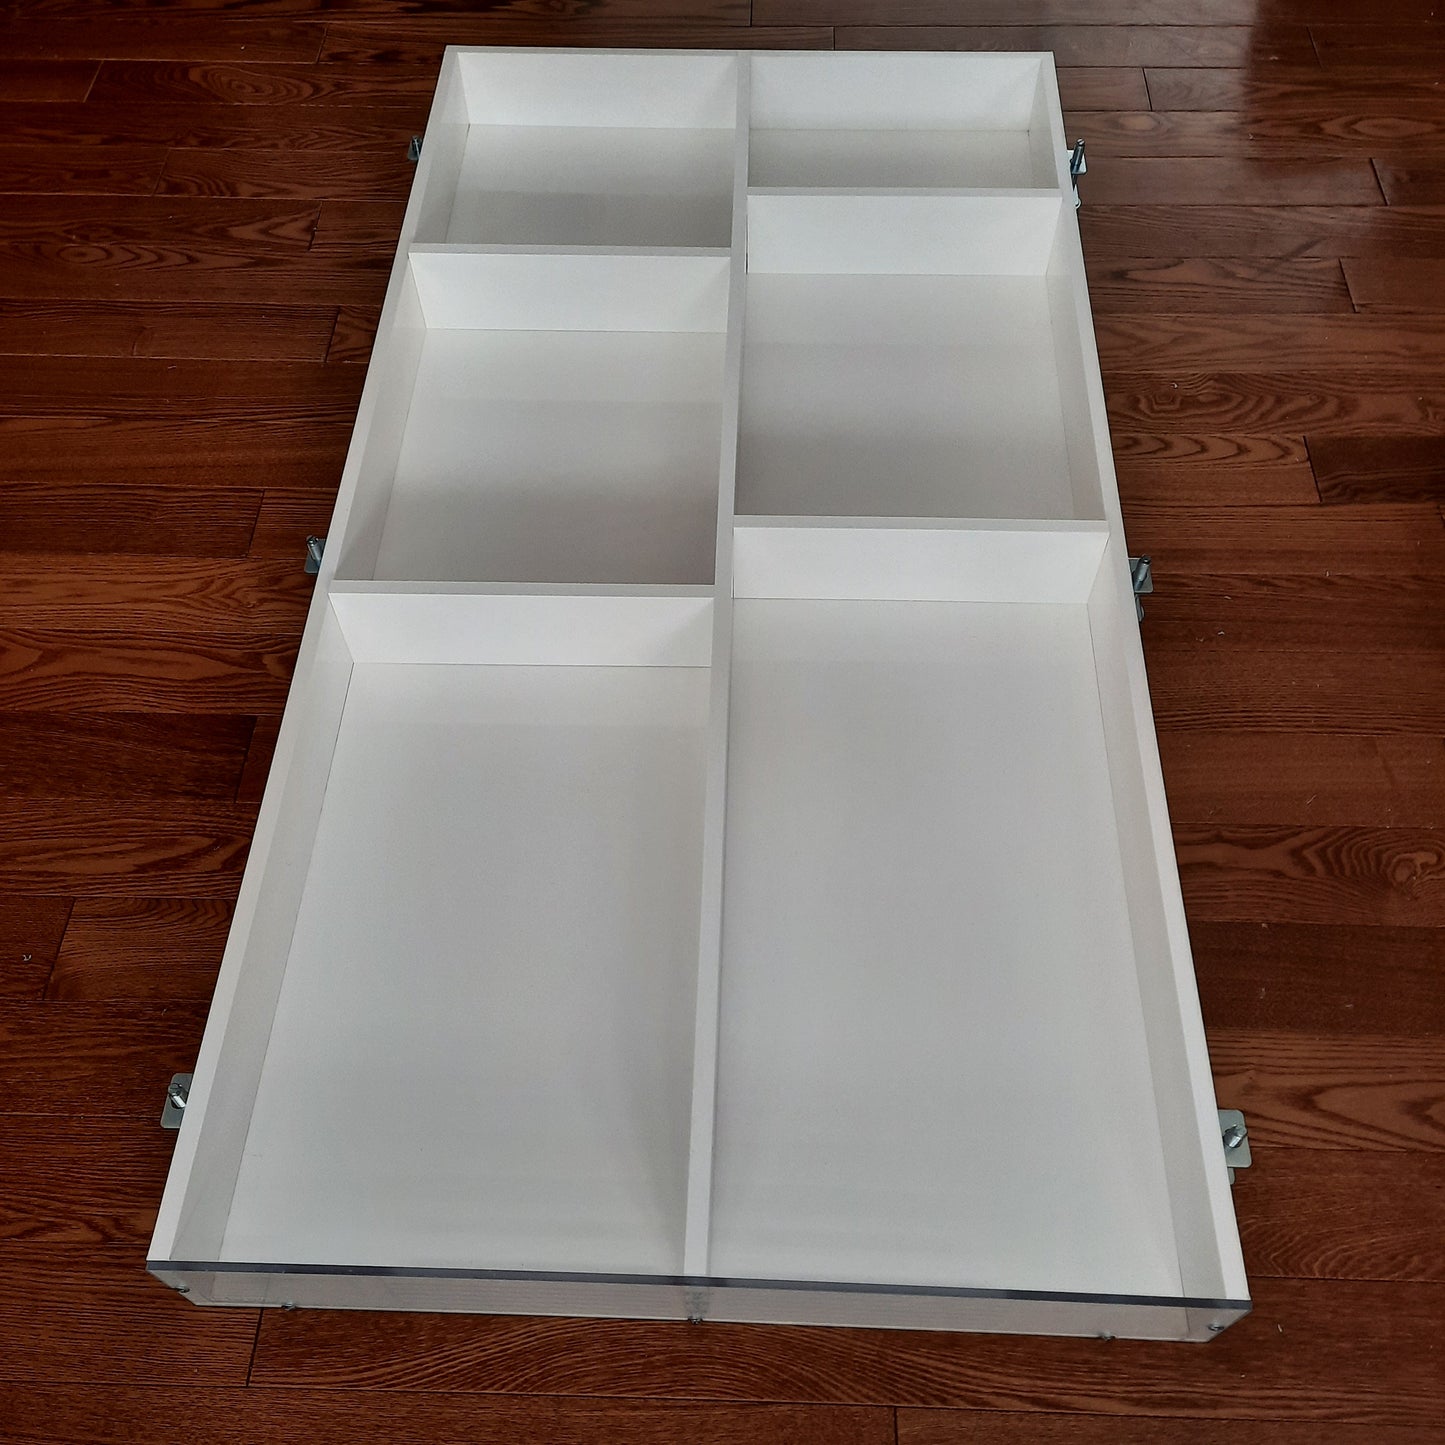 HDPE Dividers & Hold down blocks for MRM molds